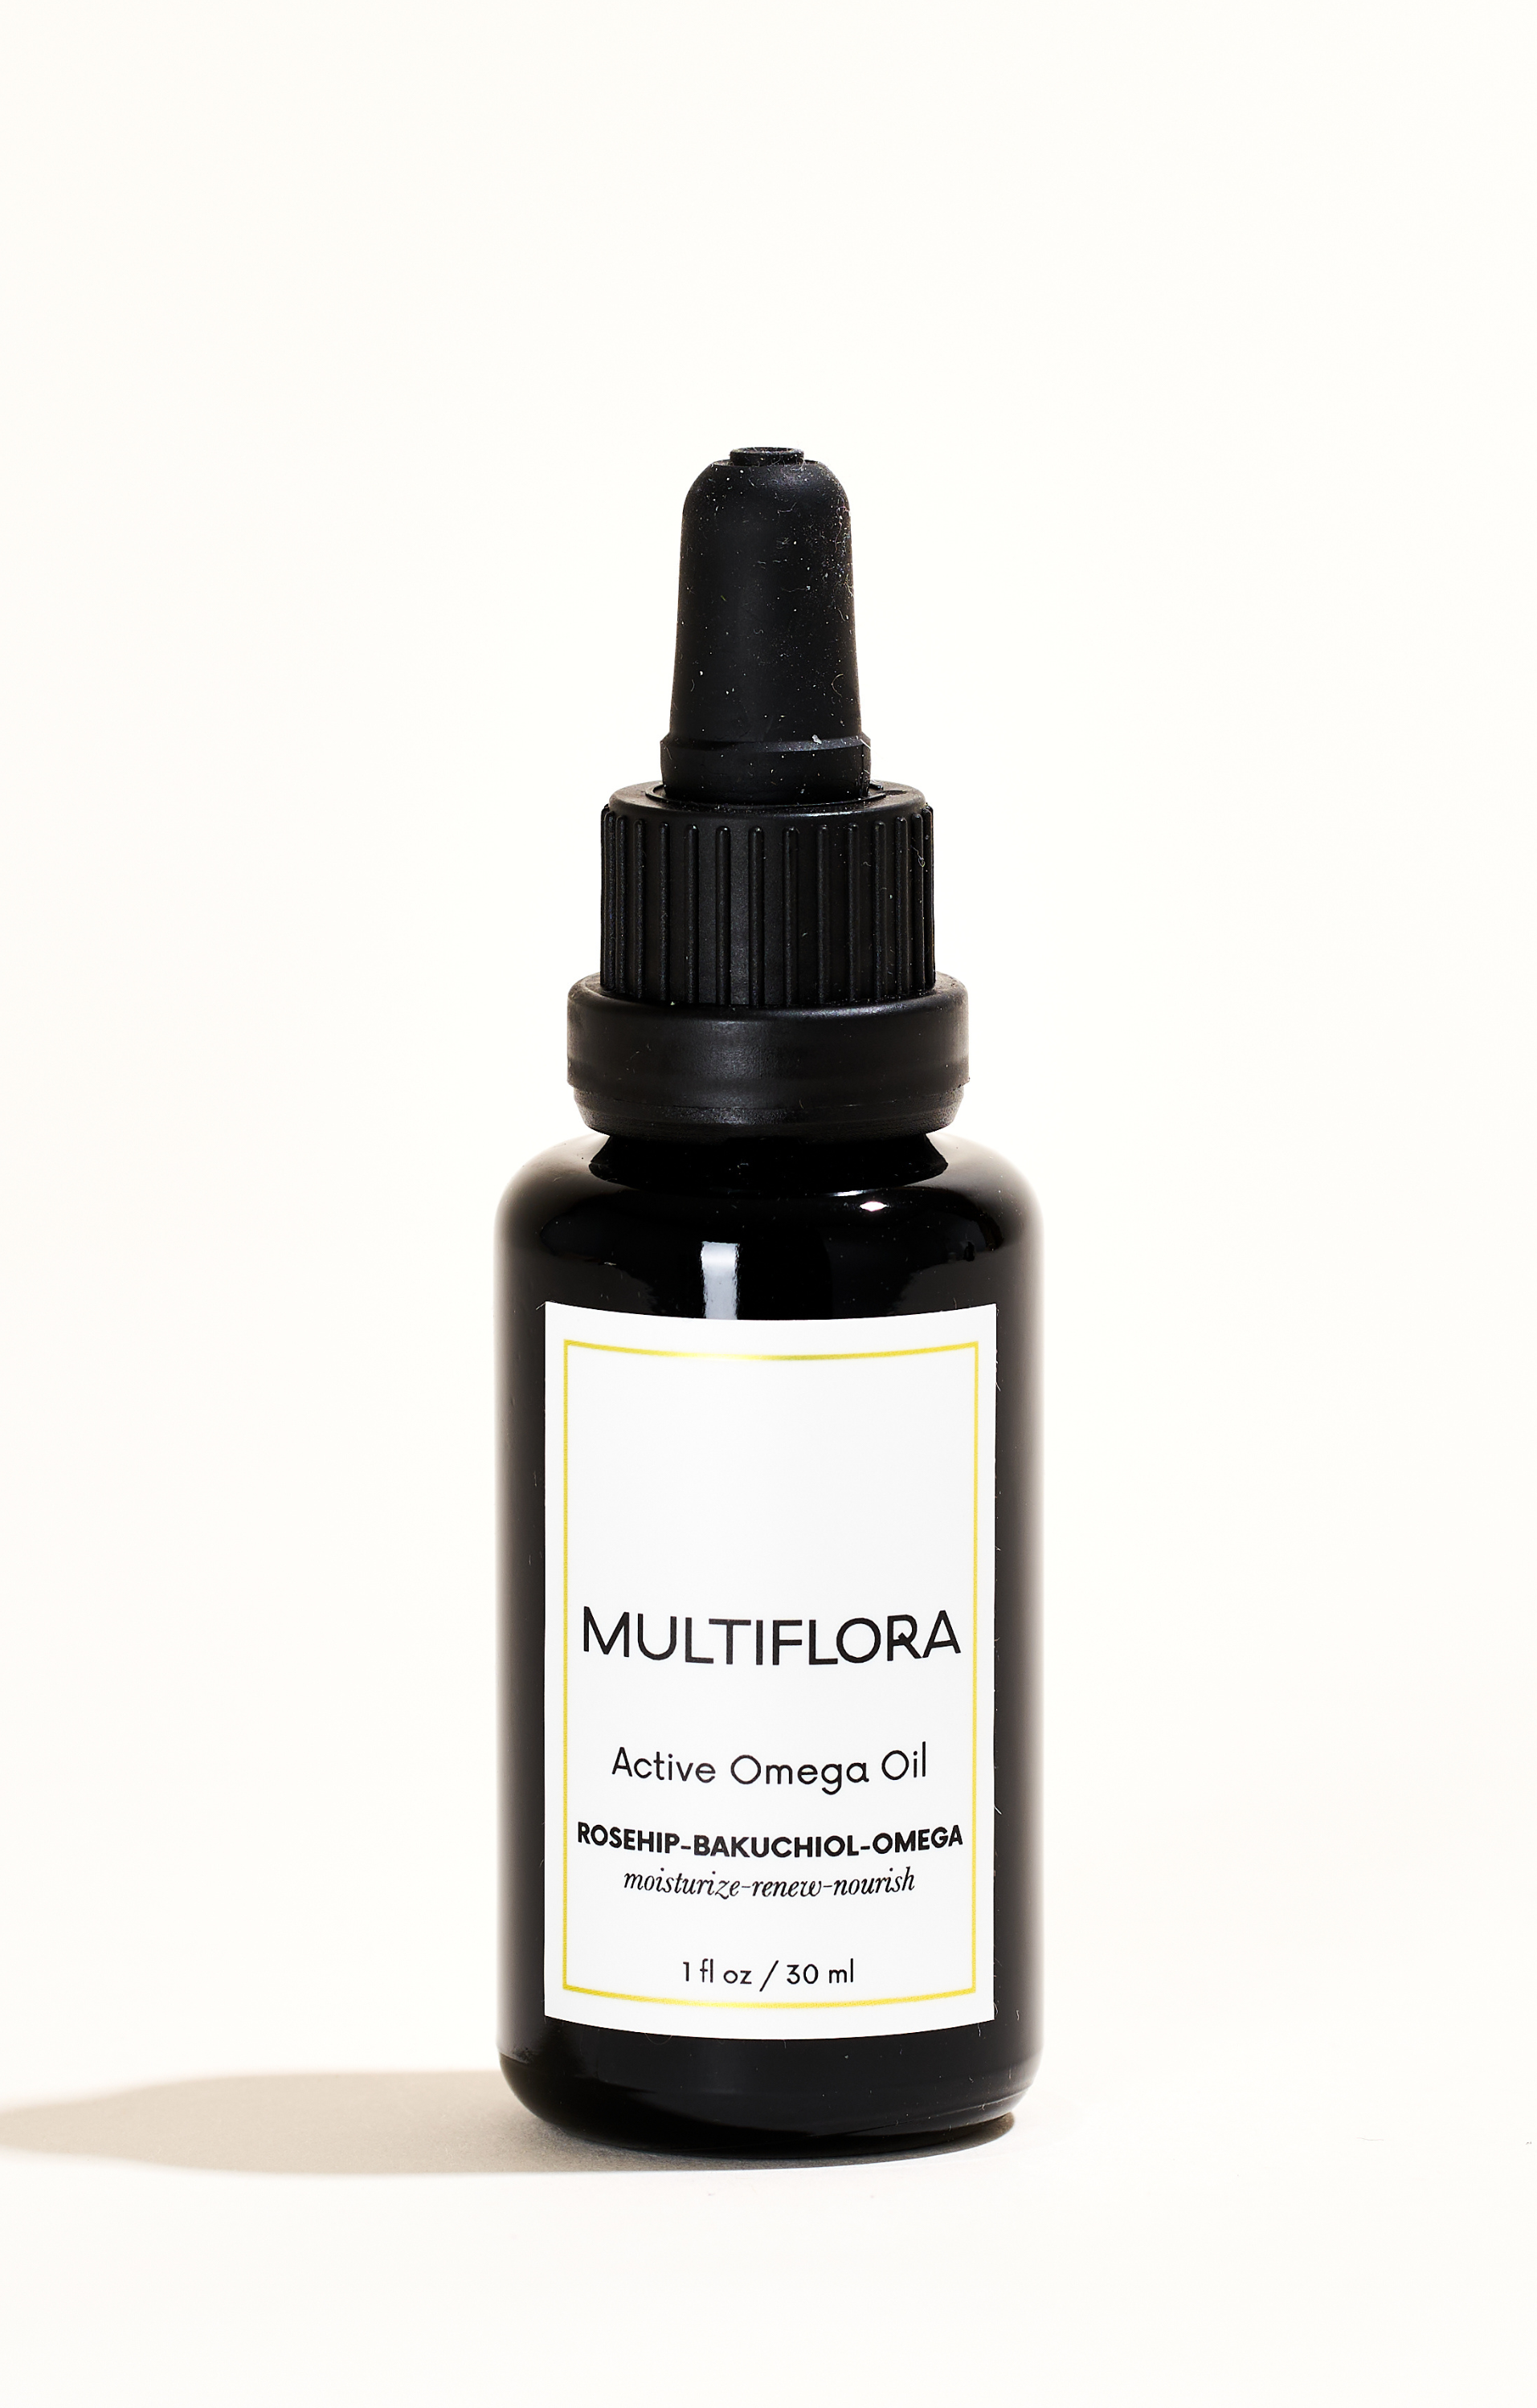 Rosehip oil product for mature and dry skin types. Contains organic rosehip oil, bakuchiol, and vitamin C